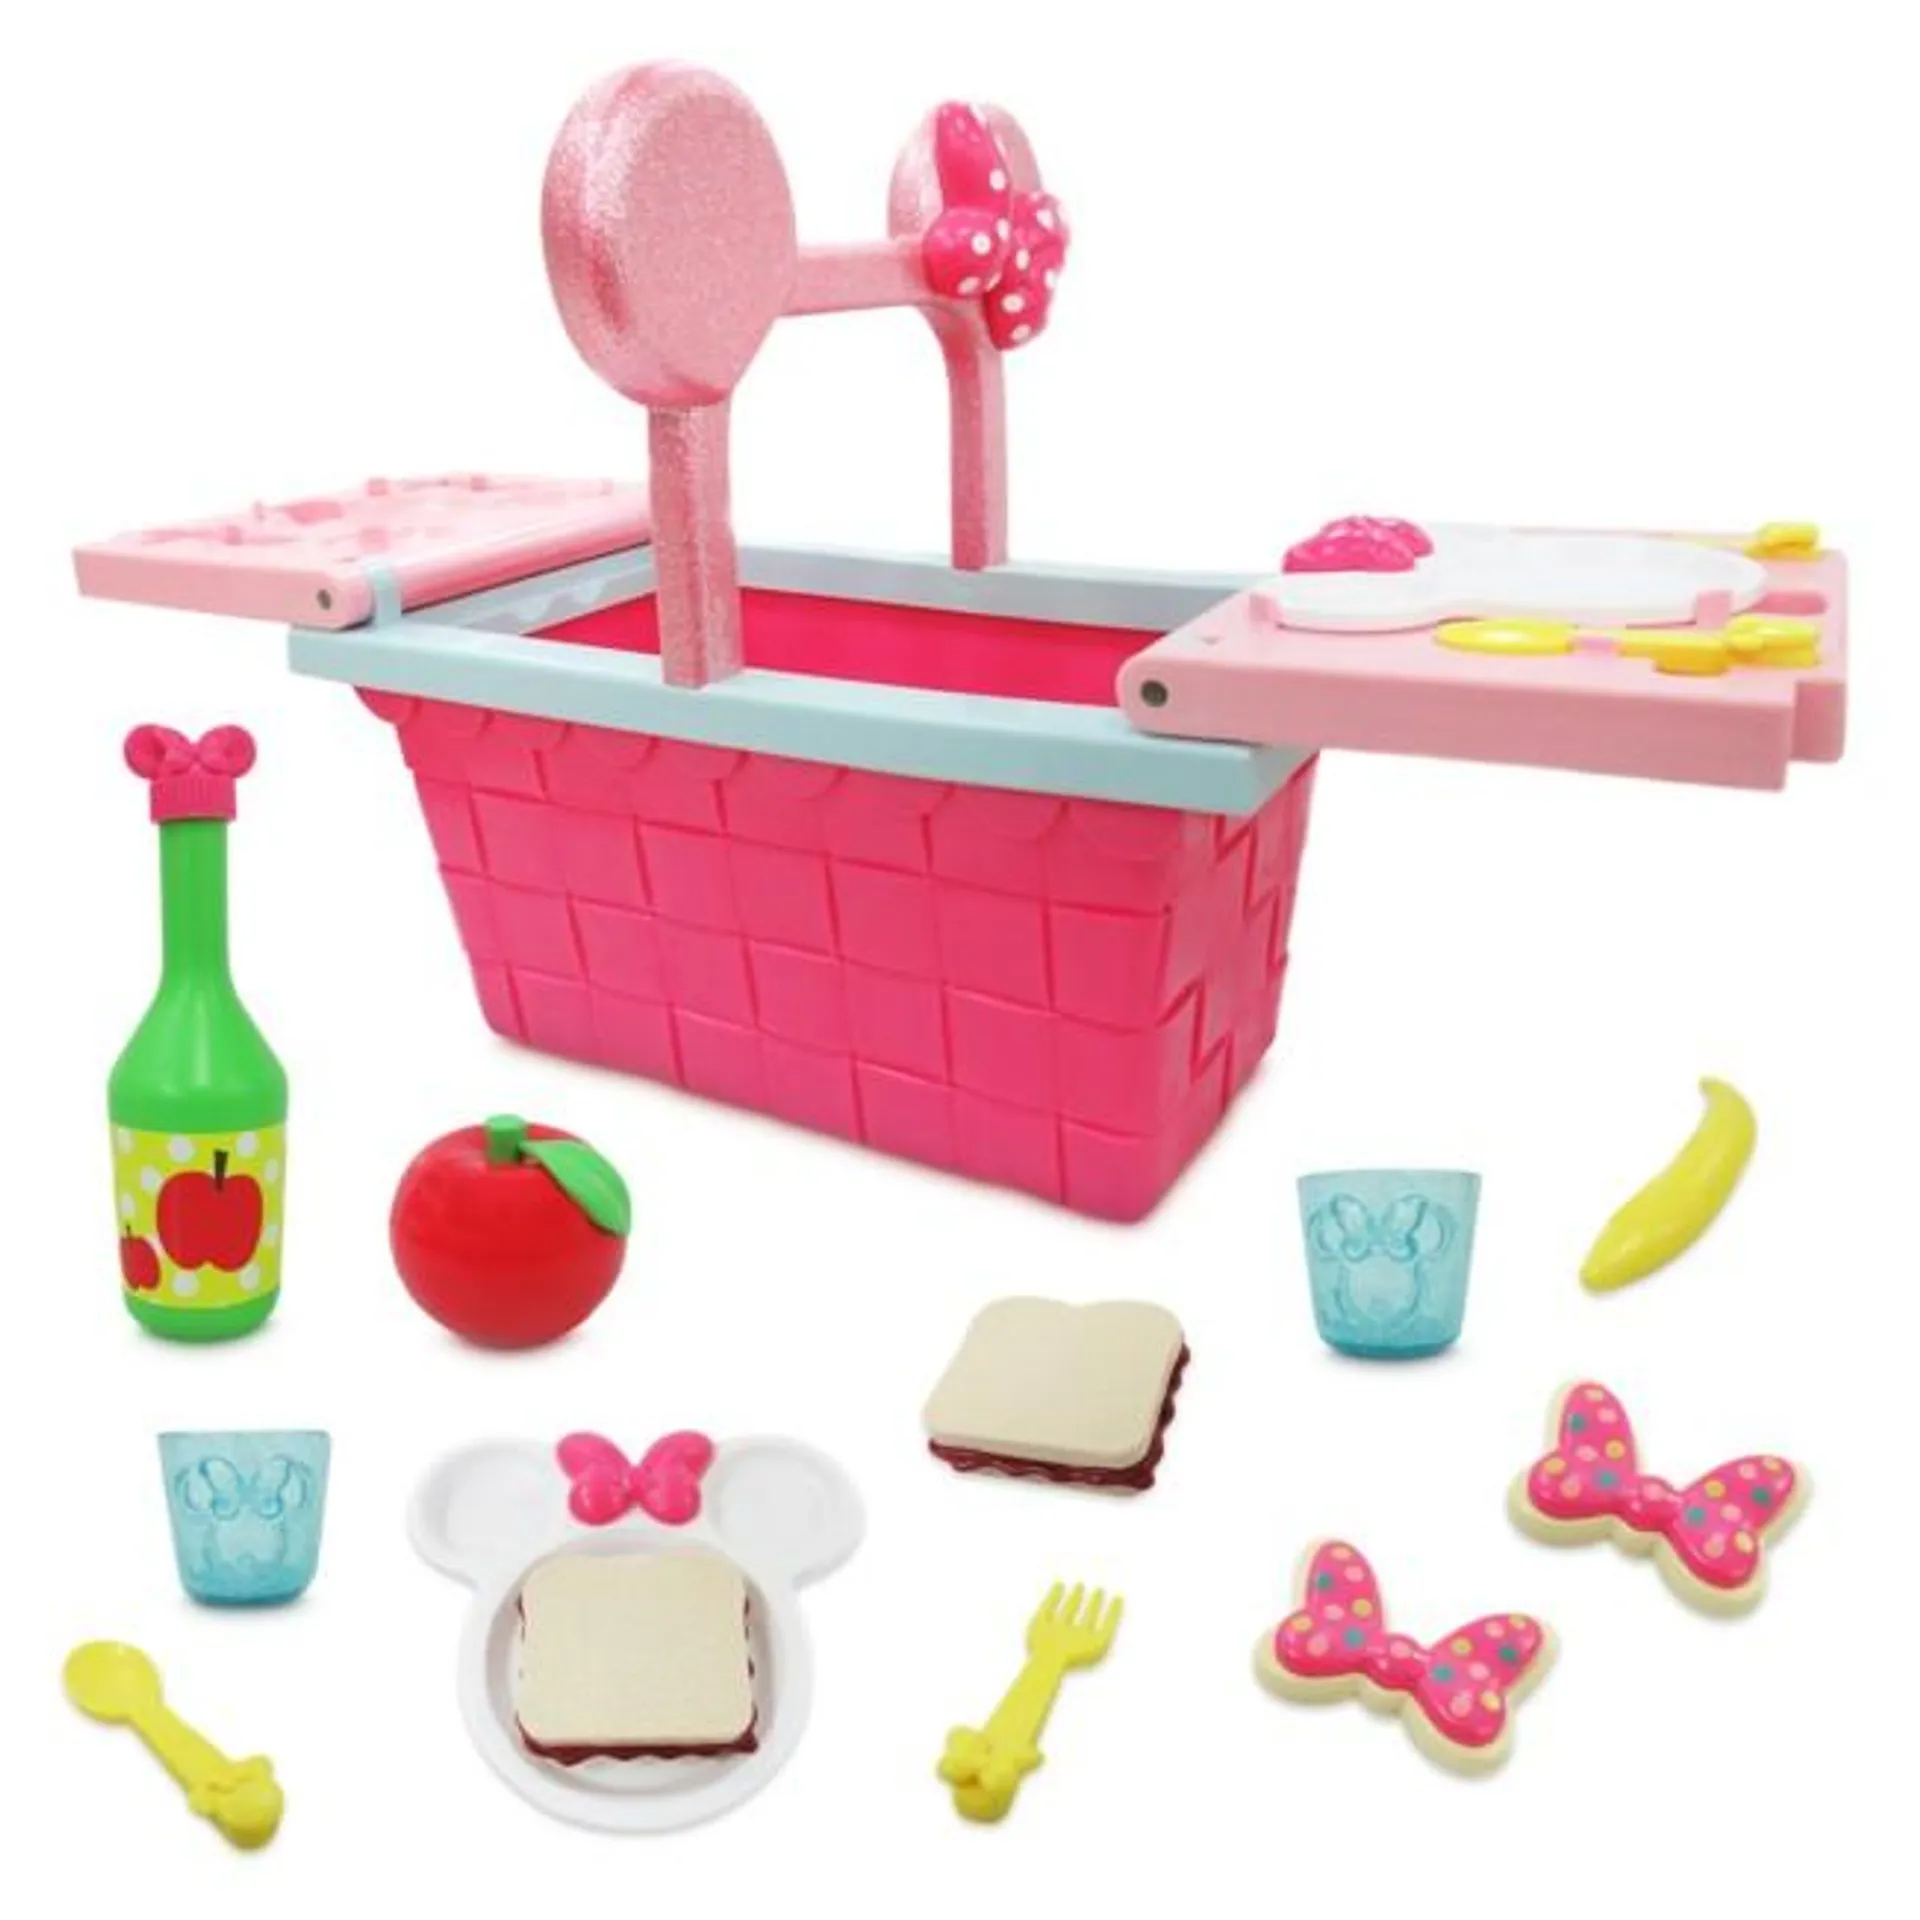 Minnie Mouse Picnic Basket Playset